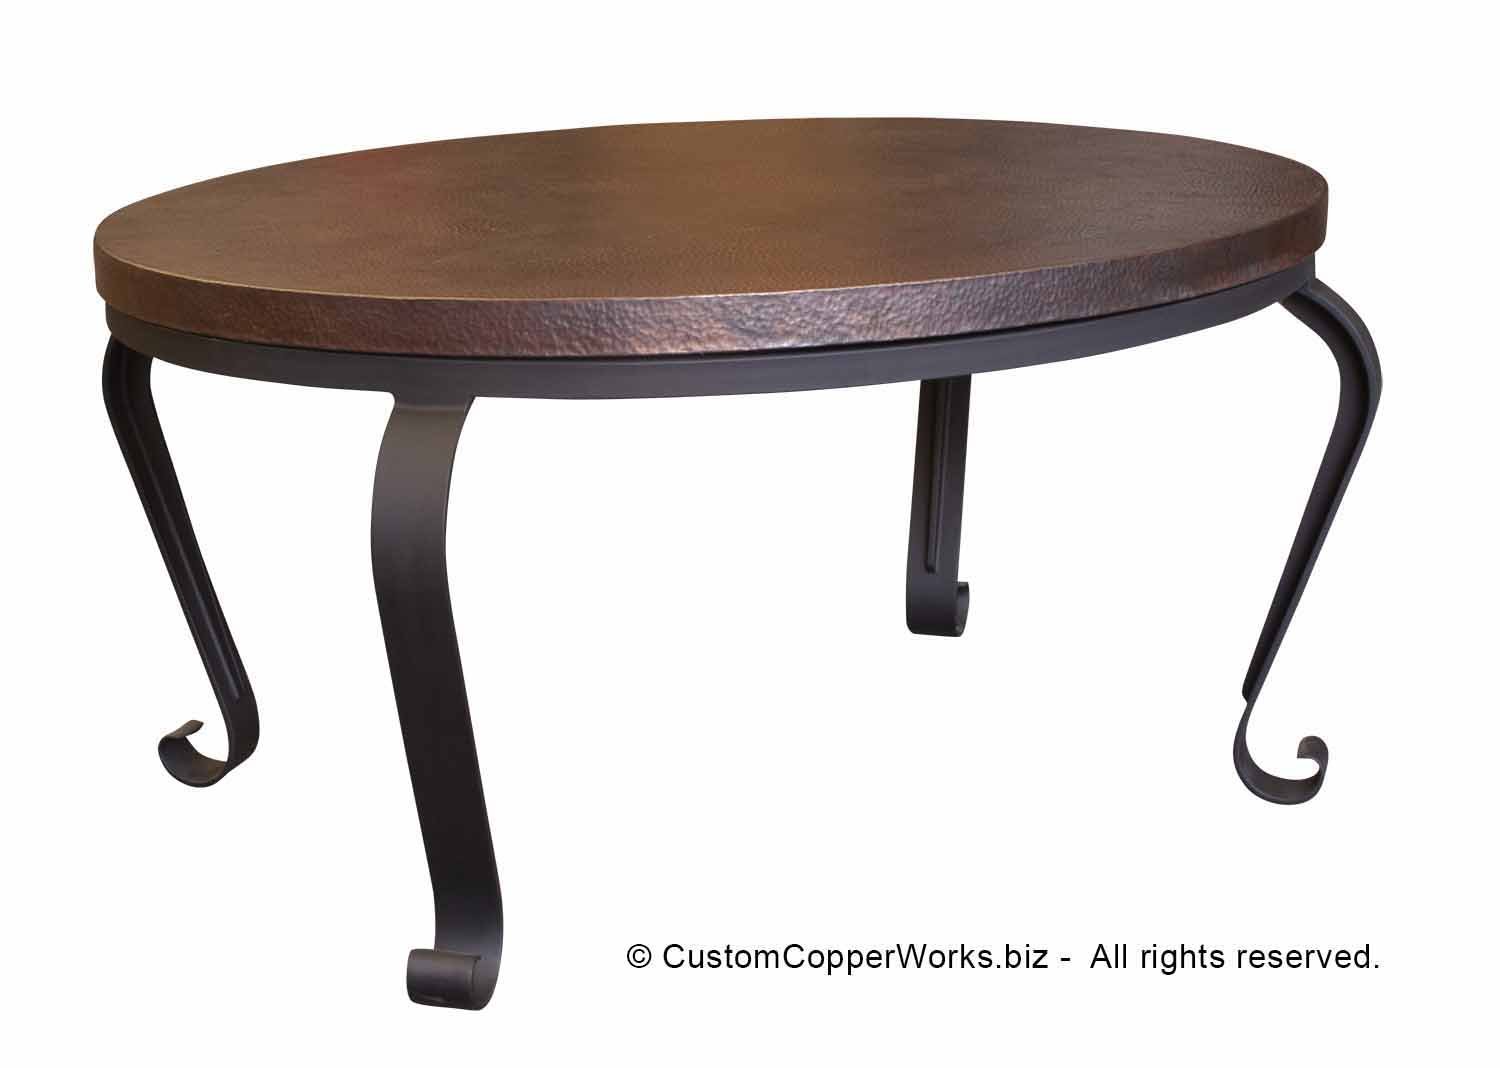  Oval copper top dining table; hand-forged iron  LORENA  table base. The timeless look of this copper top dining table design compliments Modern, Contemporary, Transitional décor palettes. 